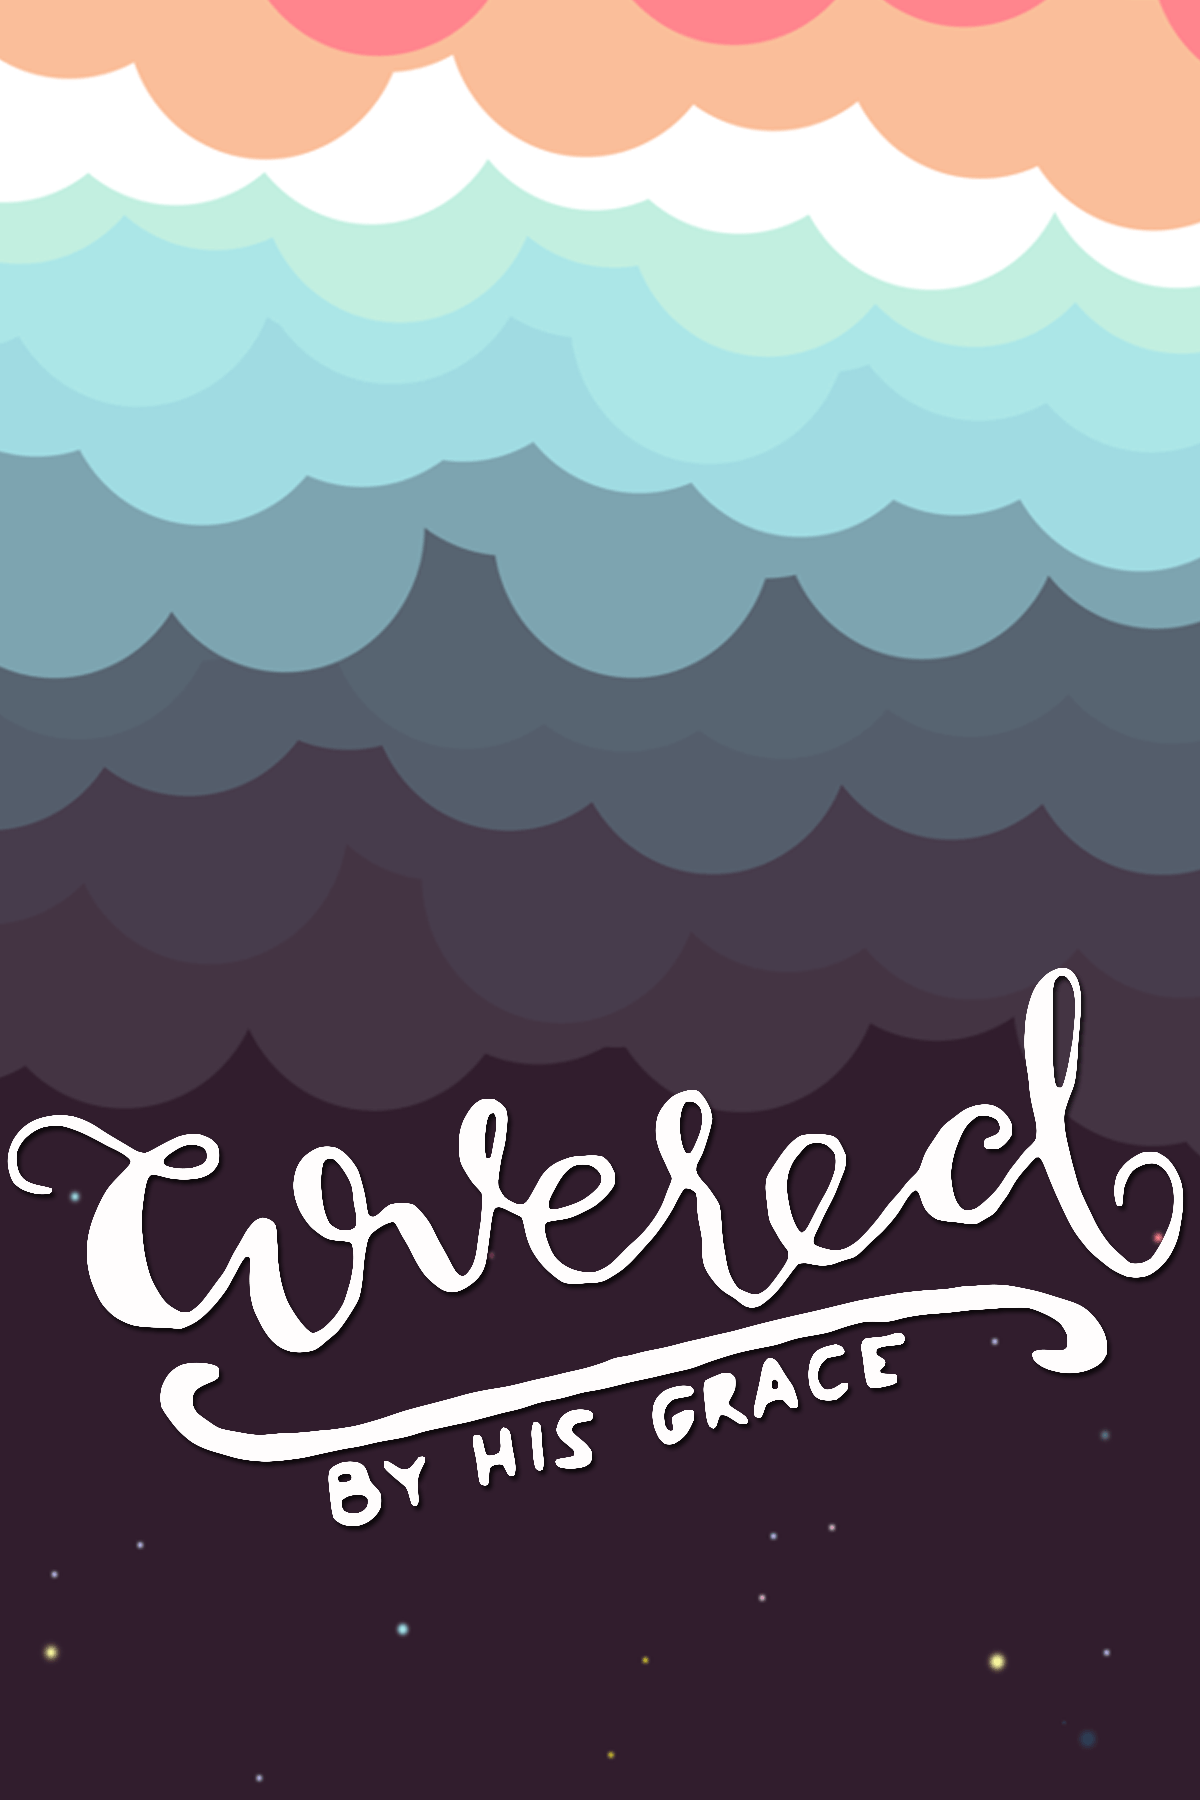 Covered by Your grace. Quotes in 2018